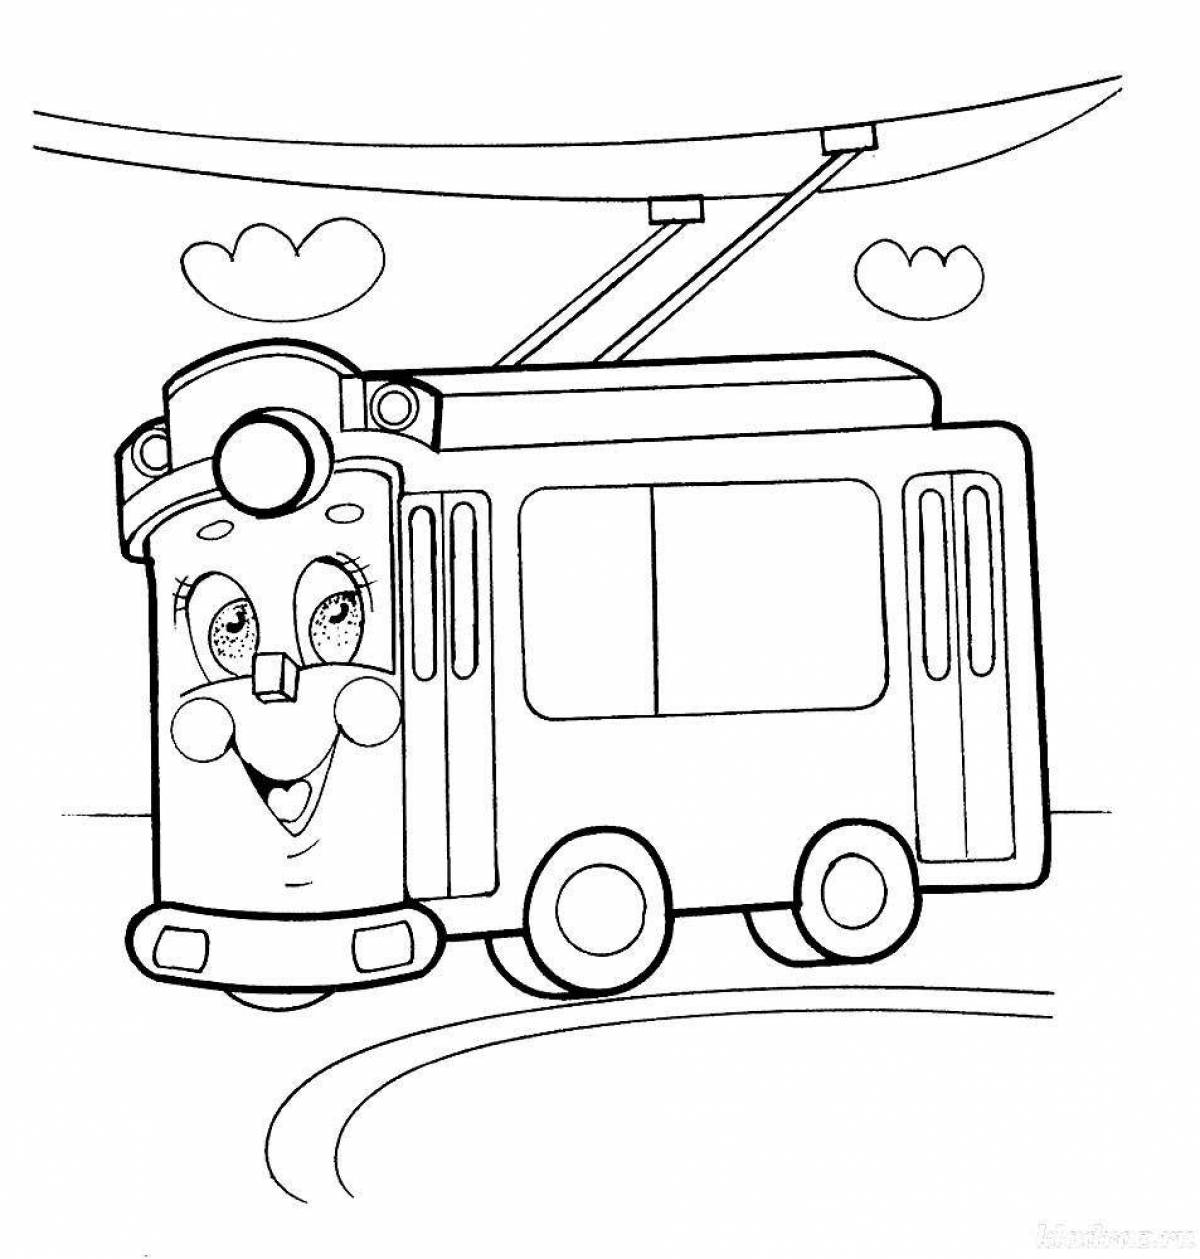 Coloring page happy trolleybus for kids